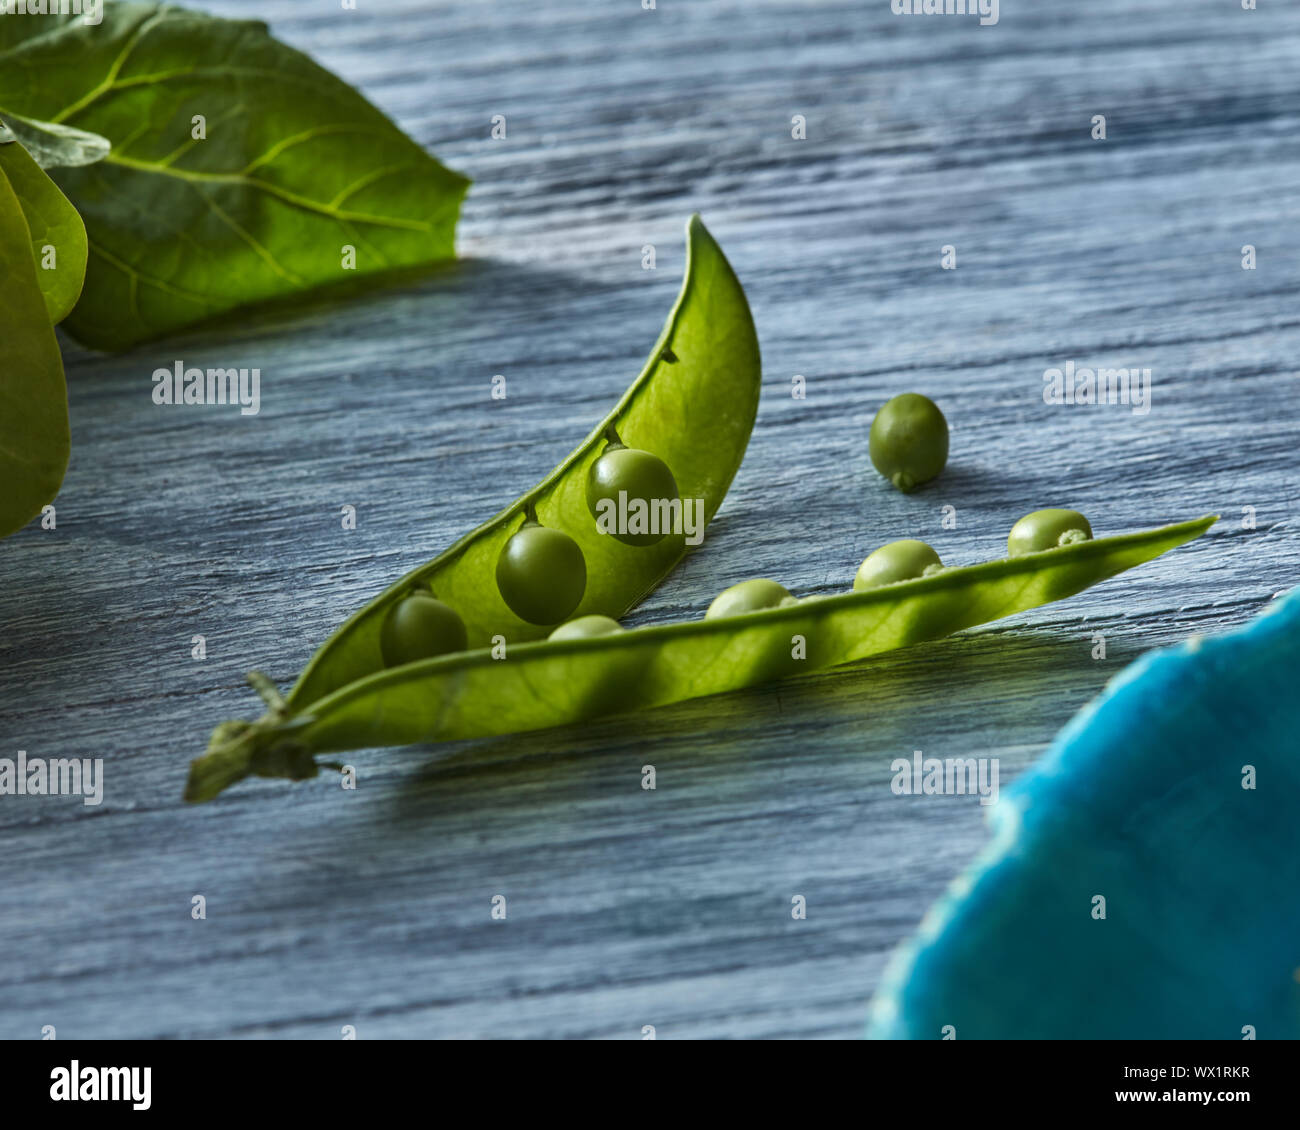 The pod of natural organic green peas is open with small spherical grains, leaf of spinach on a gray wooden background. Stock Photo